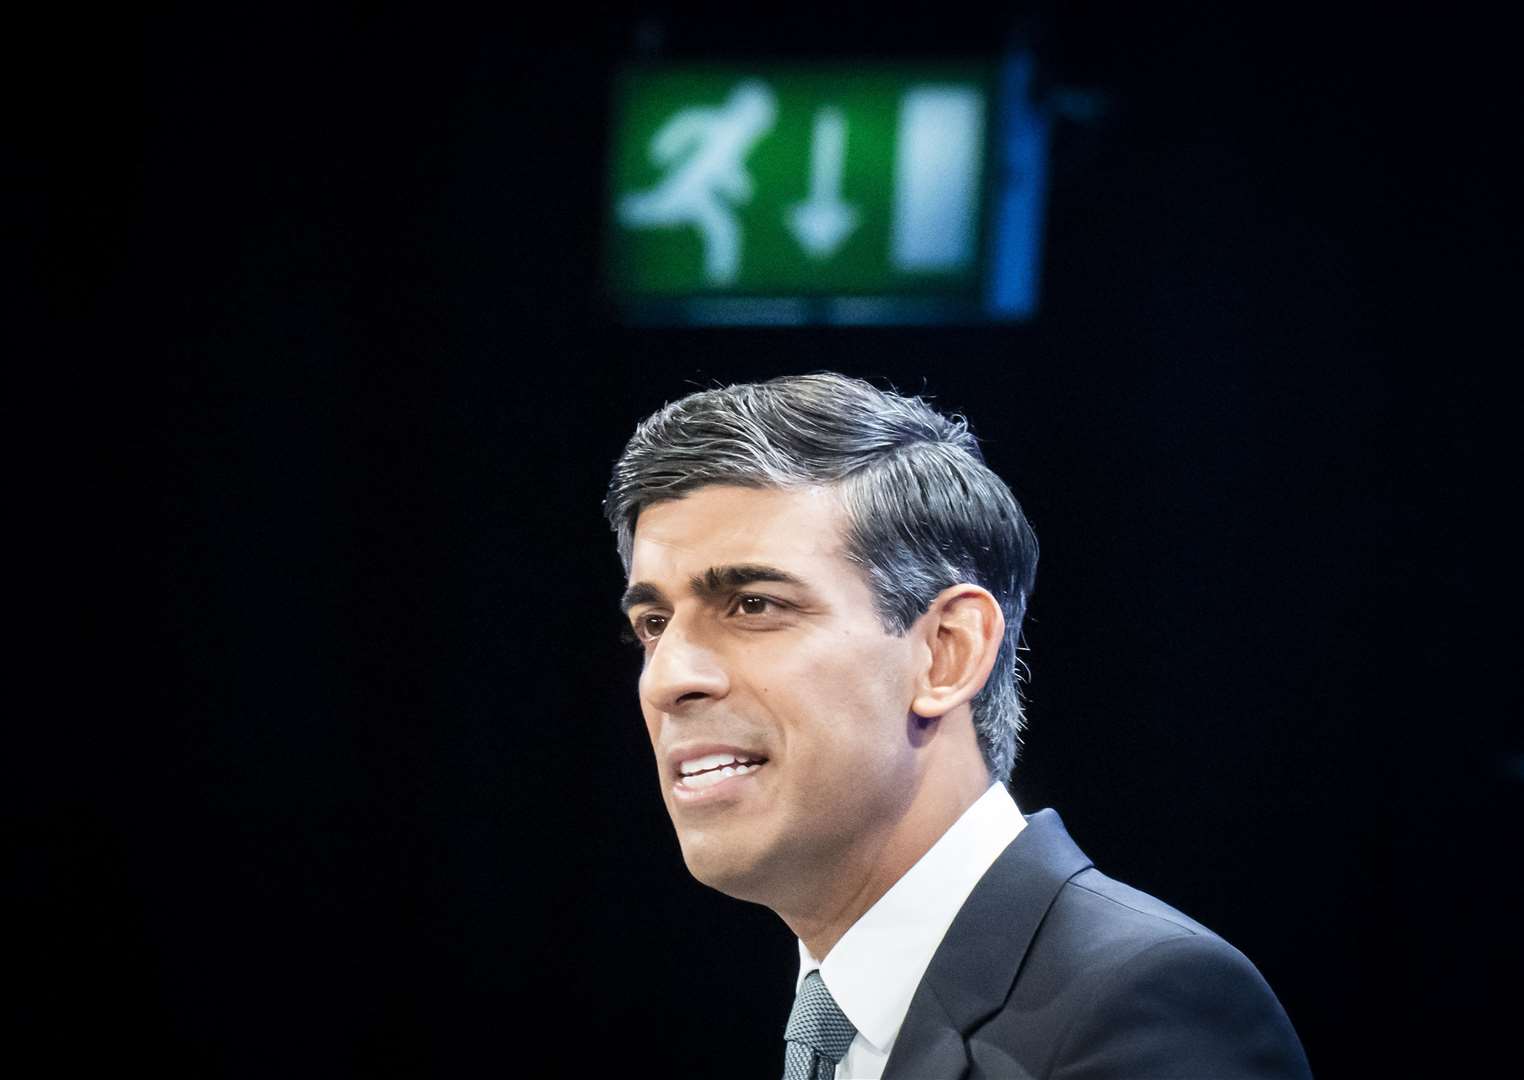 Rishi Sunak made three major policy announcements in his speech to the Conservative Party conference in Manchester (Danny Lawson/PA)